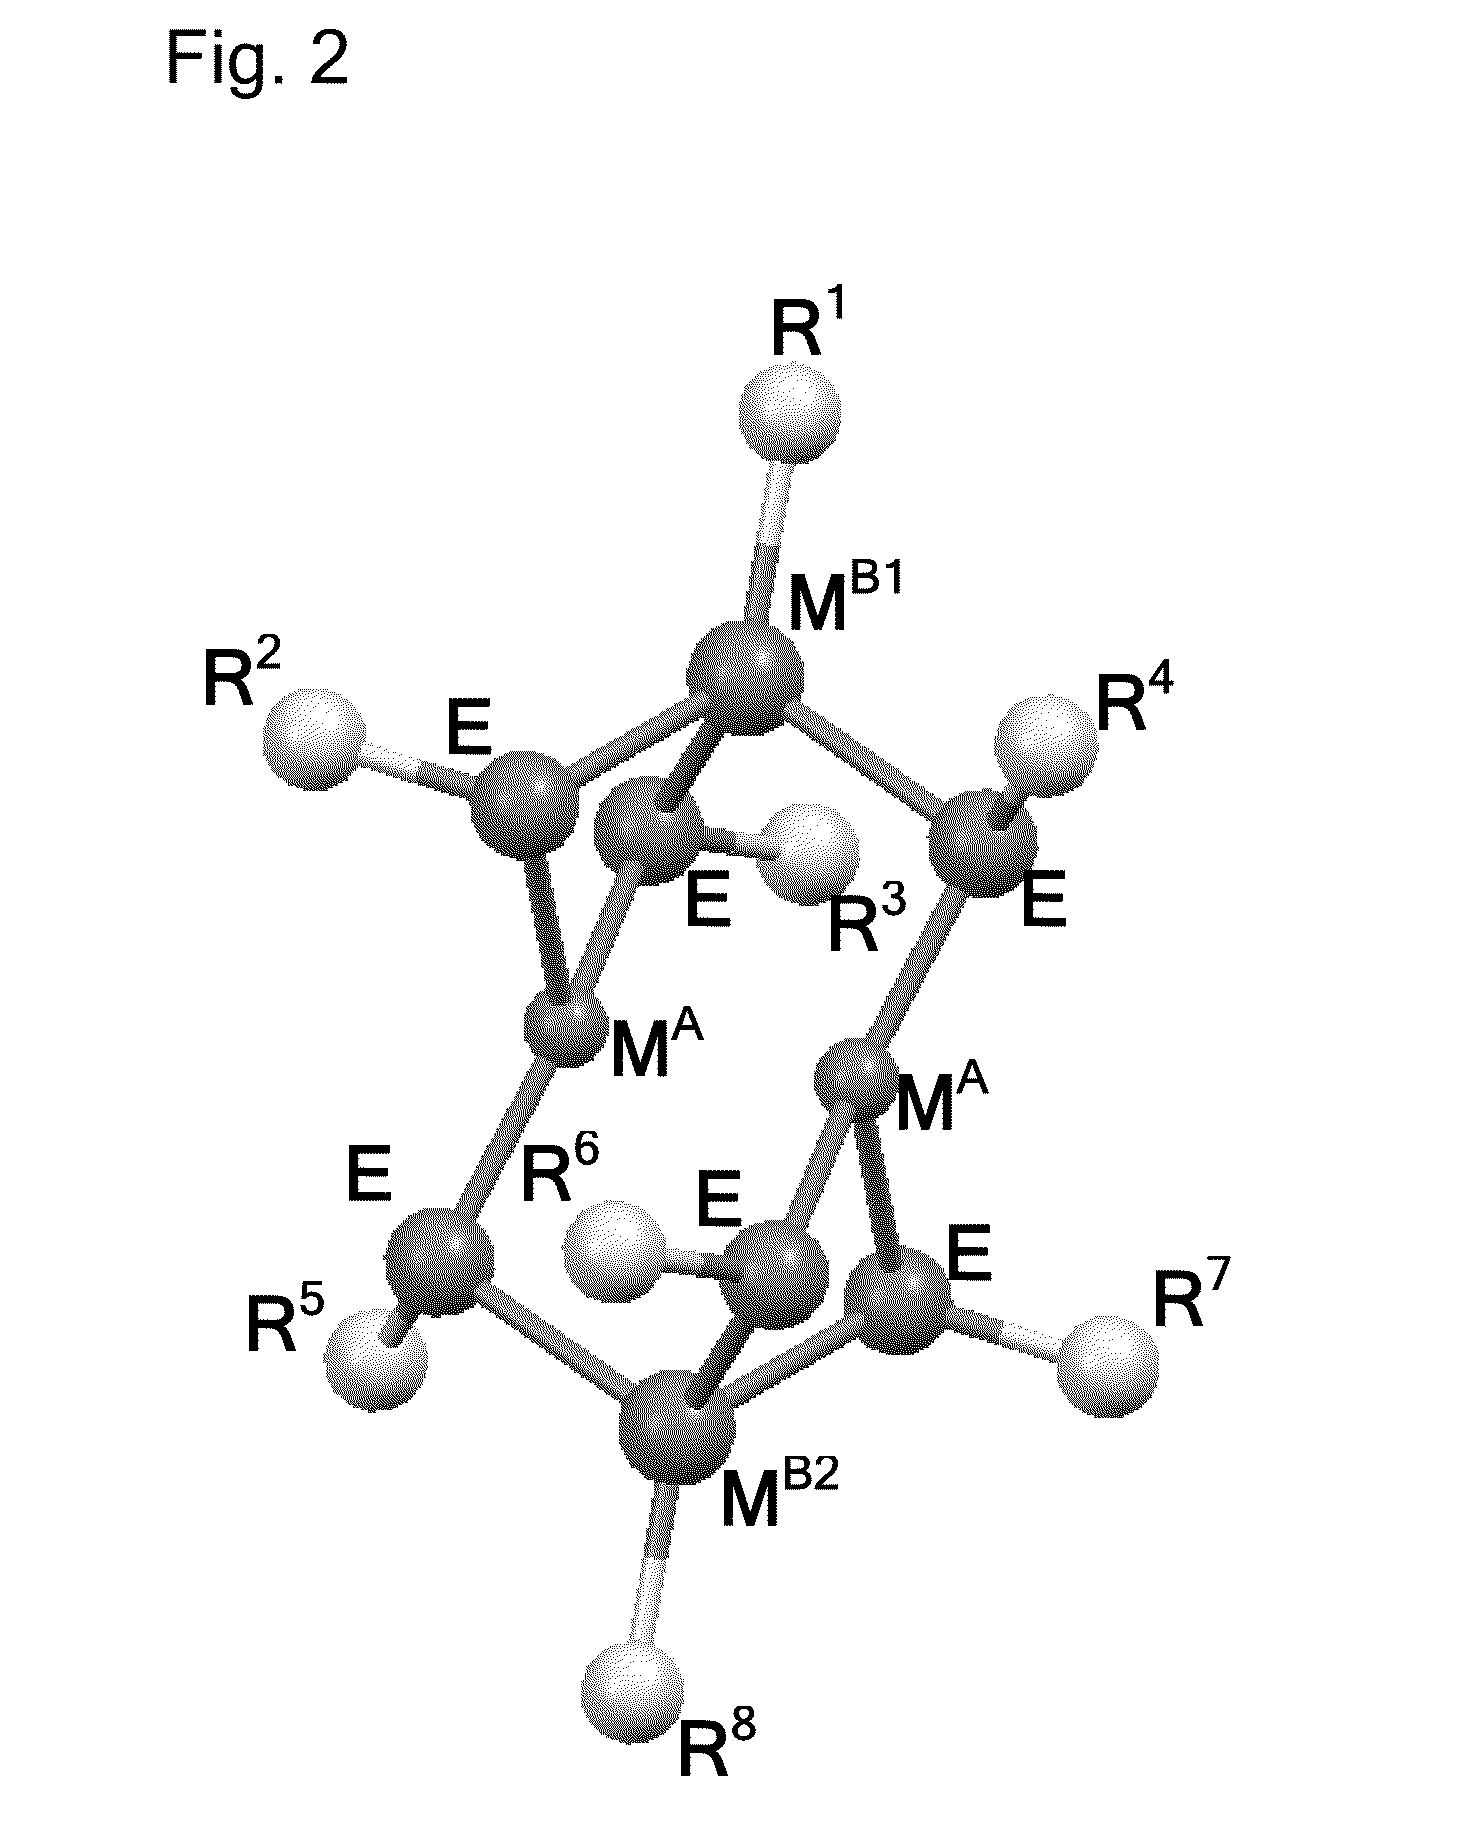 Molecular precursor methods and articles for optoelectronics